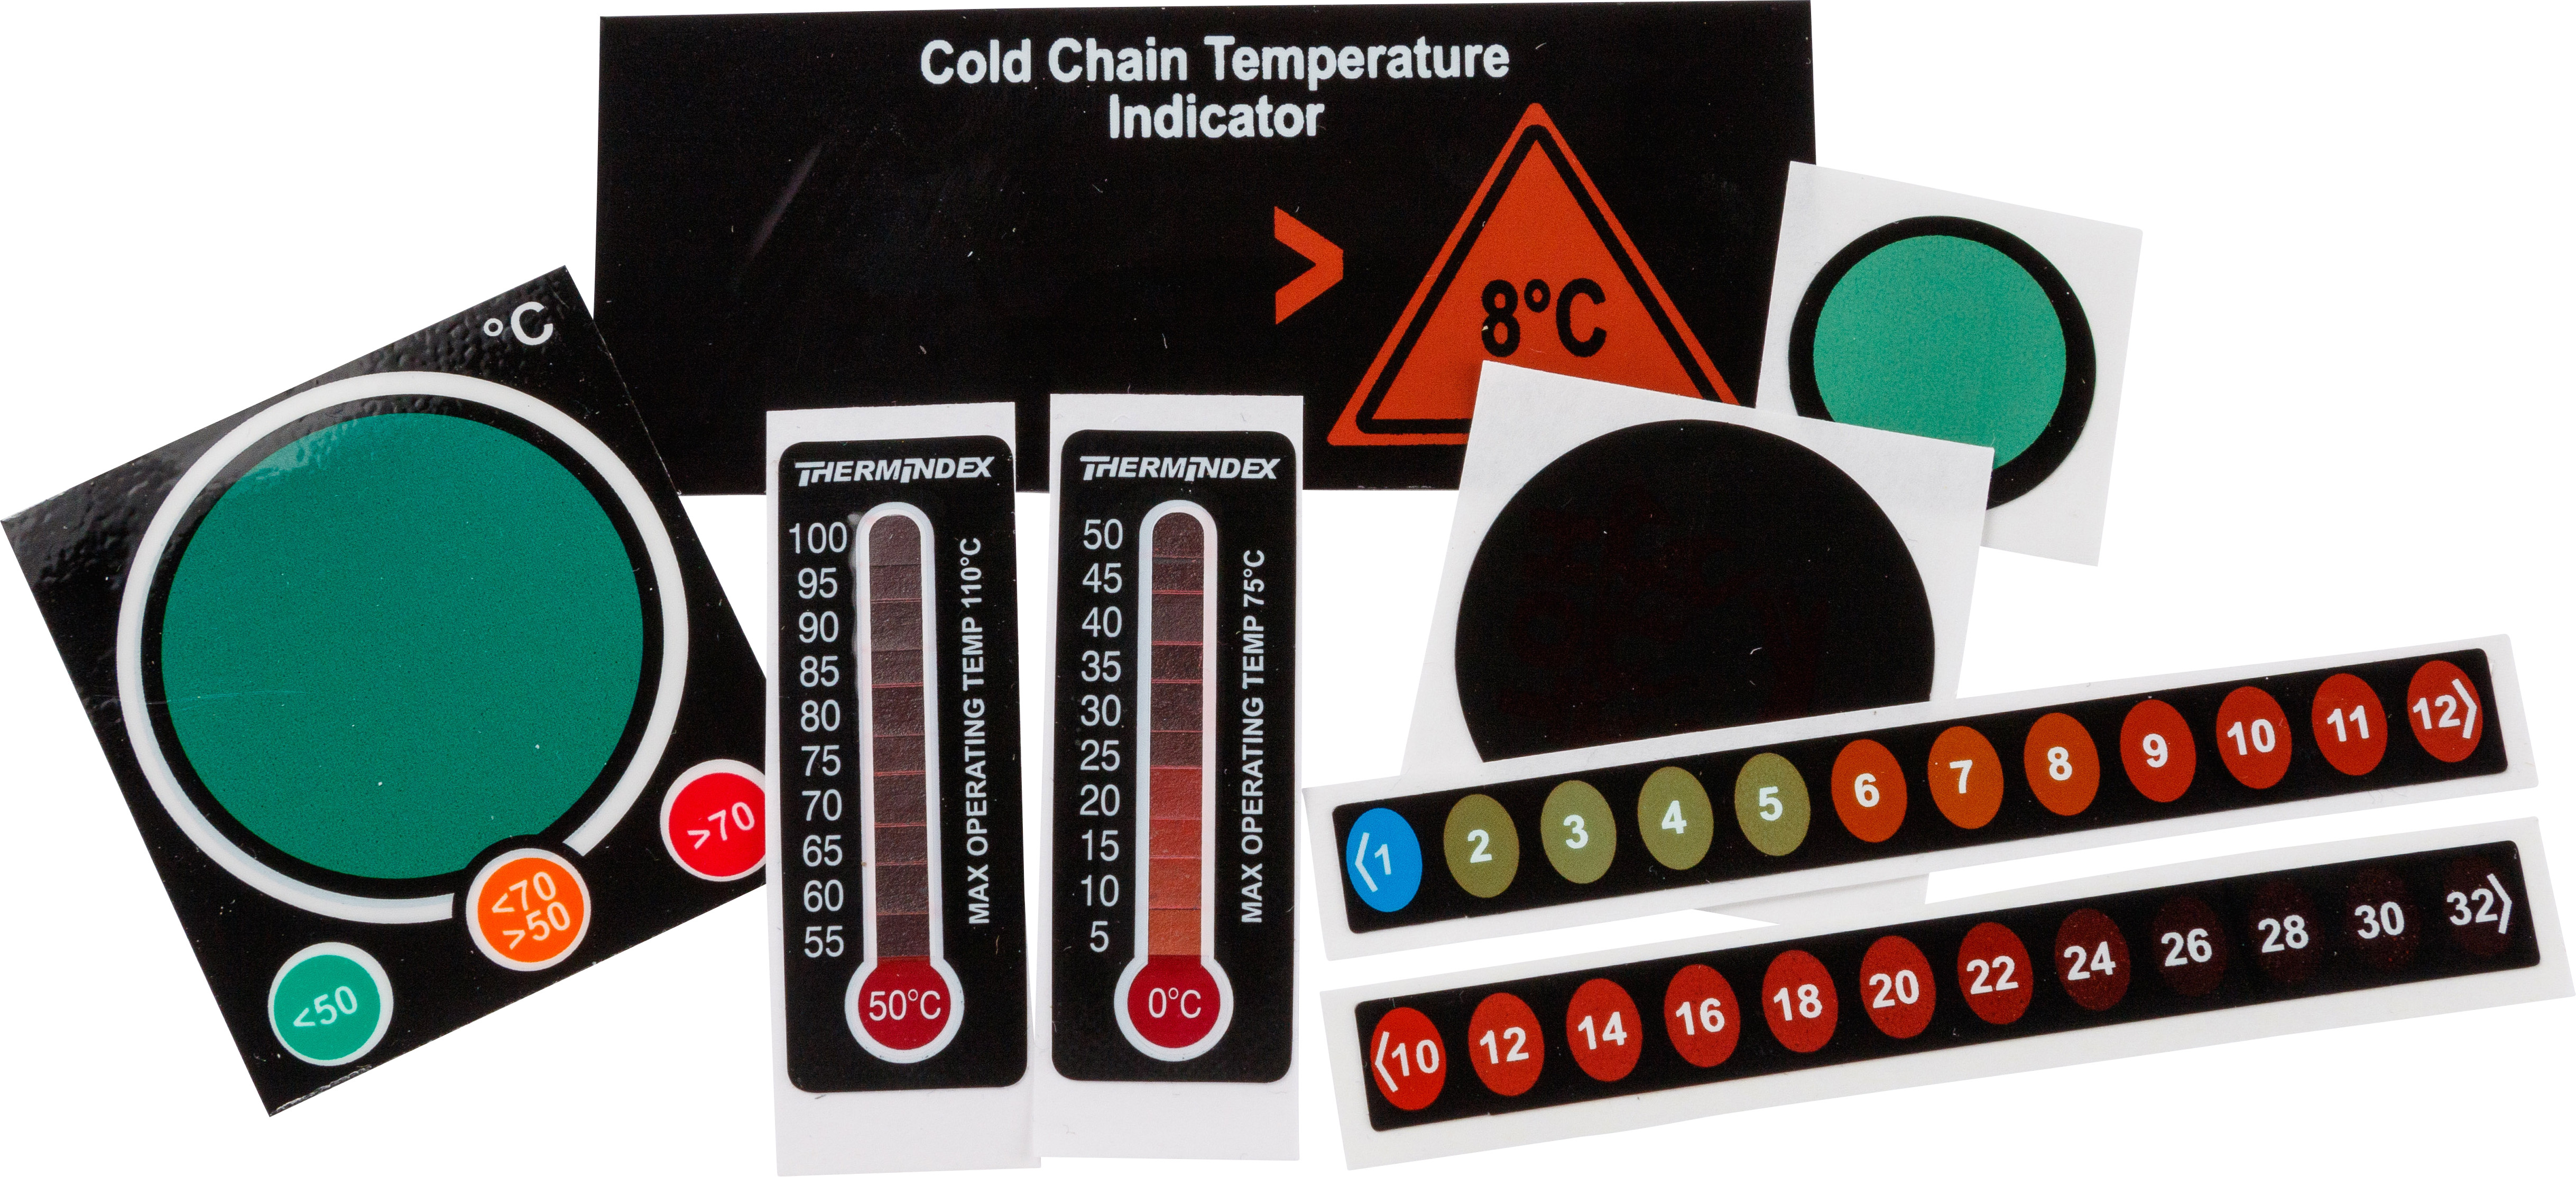 Brady Announces New Reversible Temperature Indicating Labels